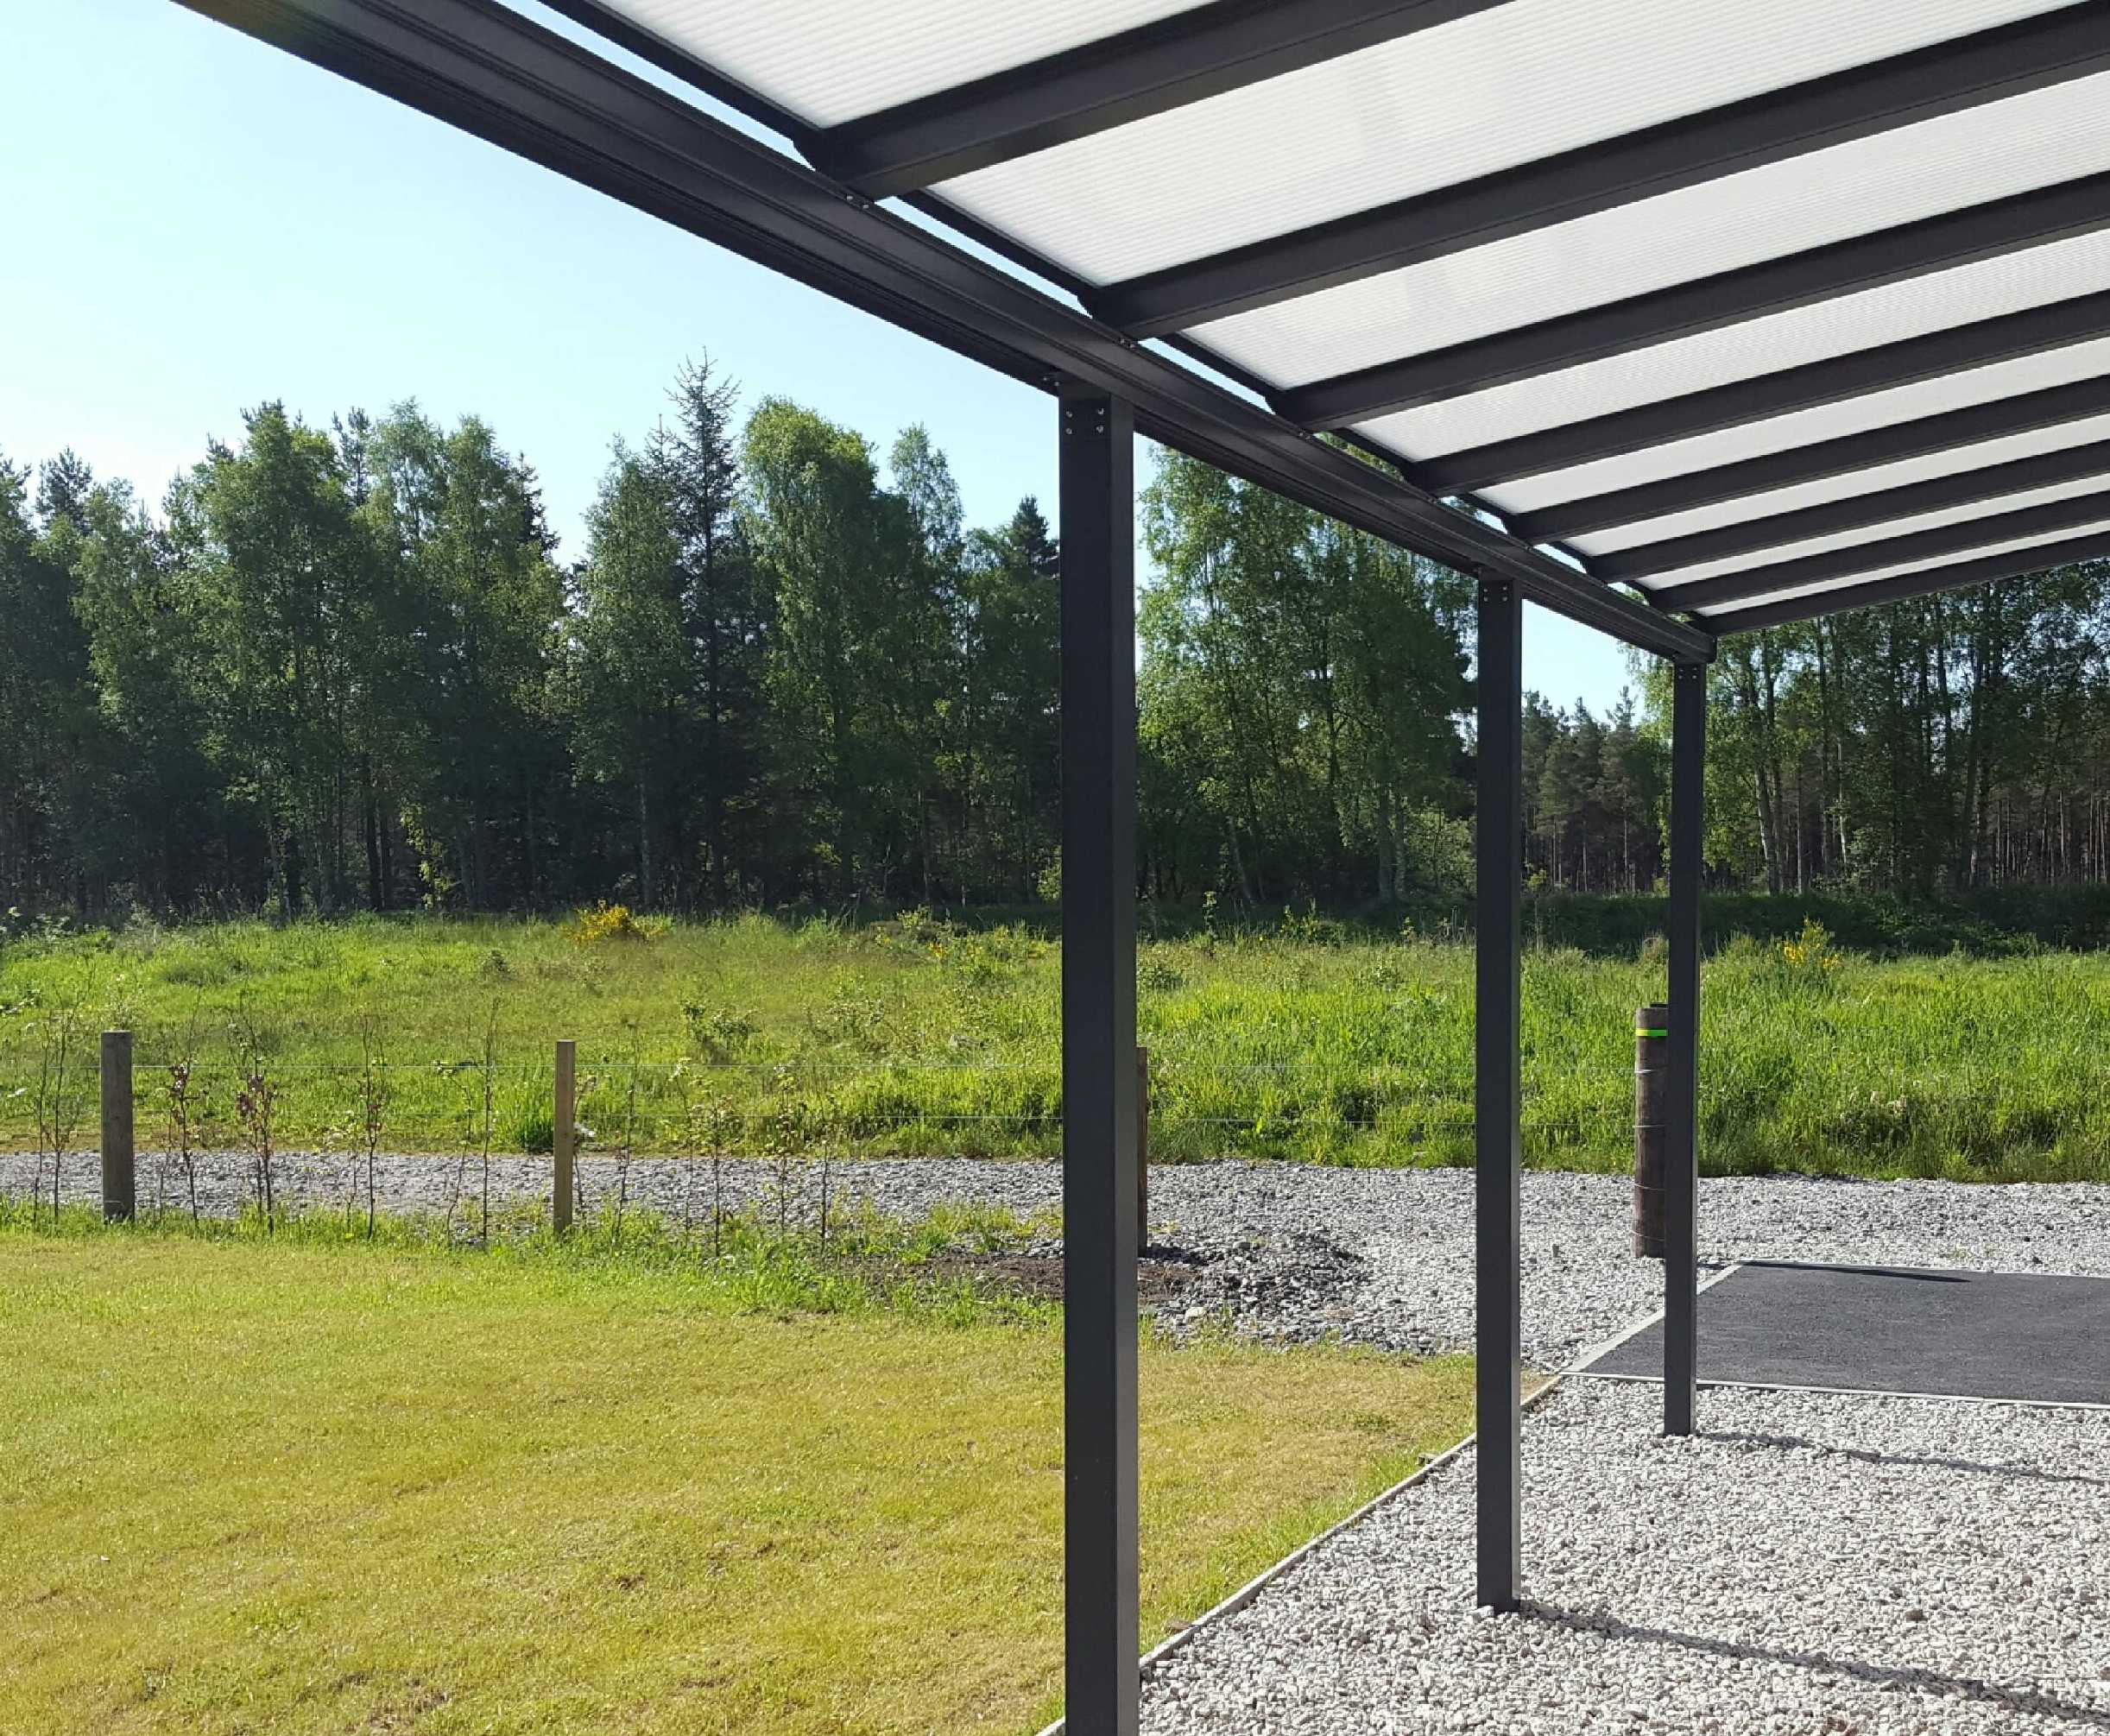 Omega Smart Lean-To Canopy, Anthracite Grey, UNGLAZED for 6mm Glazing - 4.2m (W) x 2.5m (P), (3) Supporting Posts